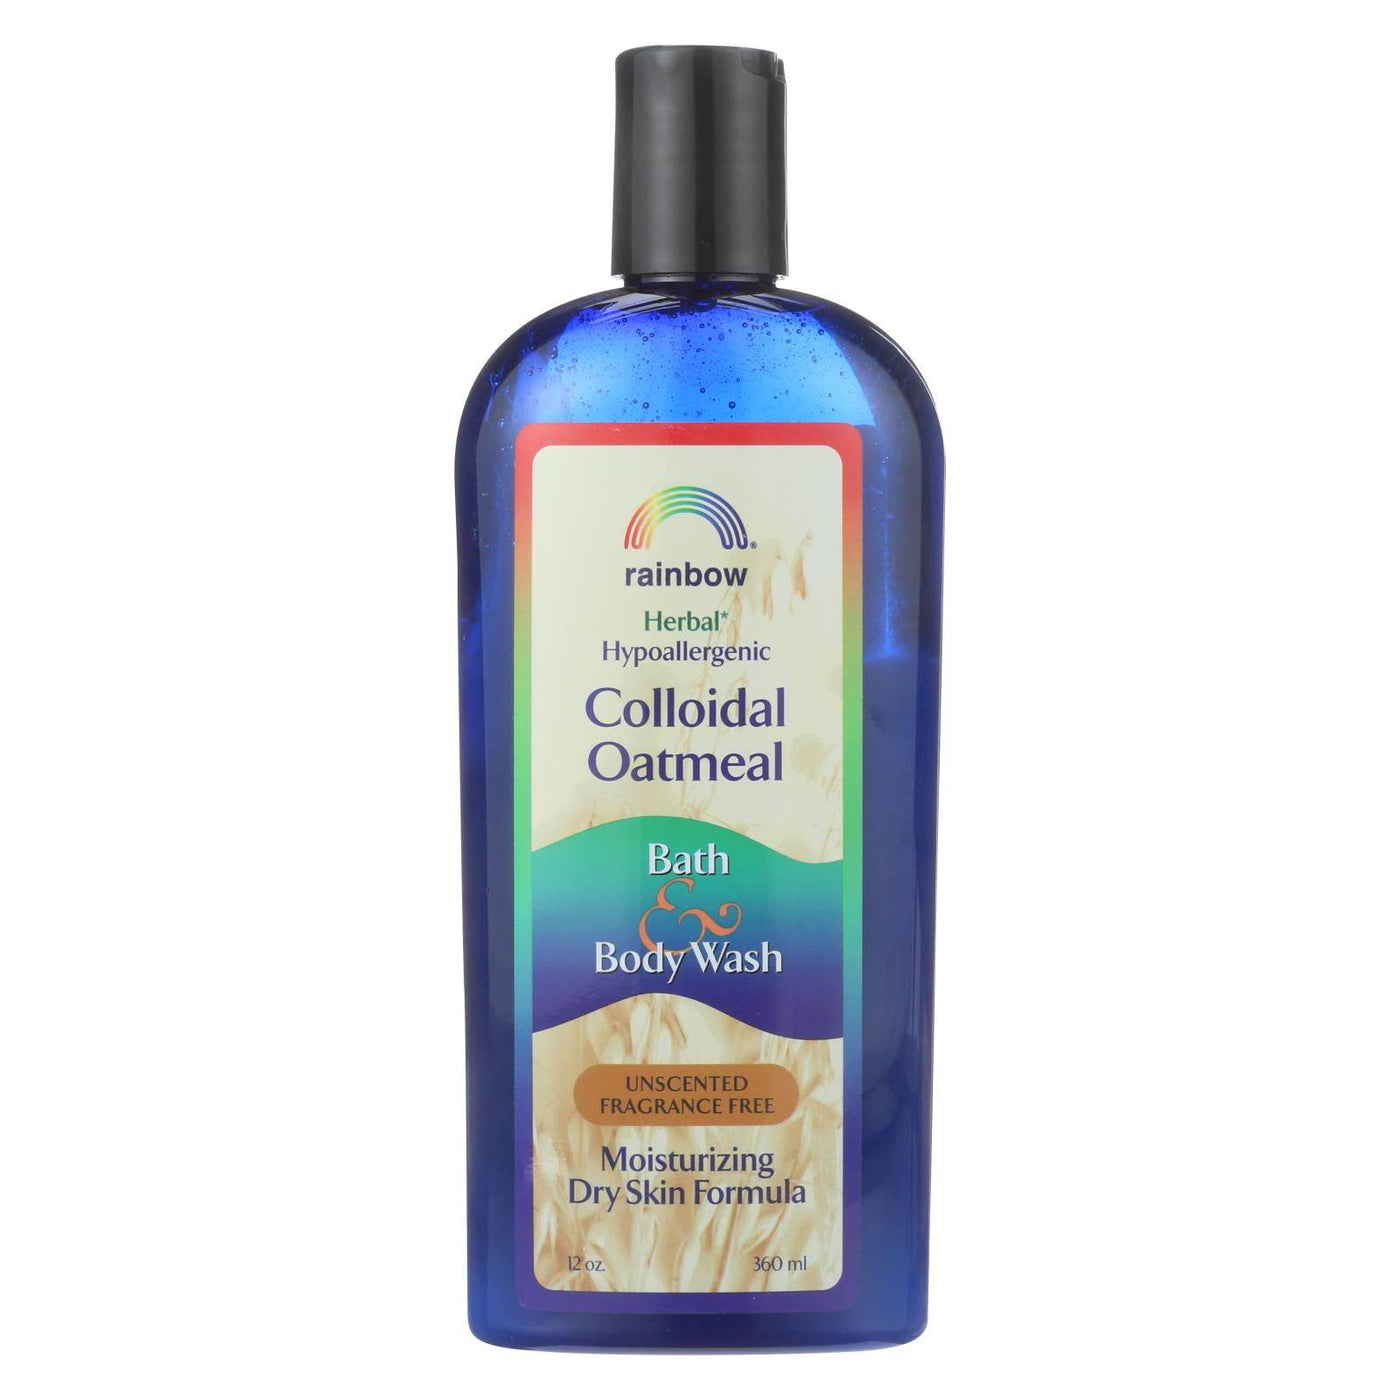 Rainbow Research Colloidal Oatmeal Bath And Body Wash - Fragrance Free - 12 Oz | OnlyNaturals.us